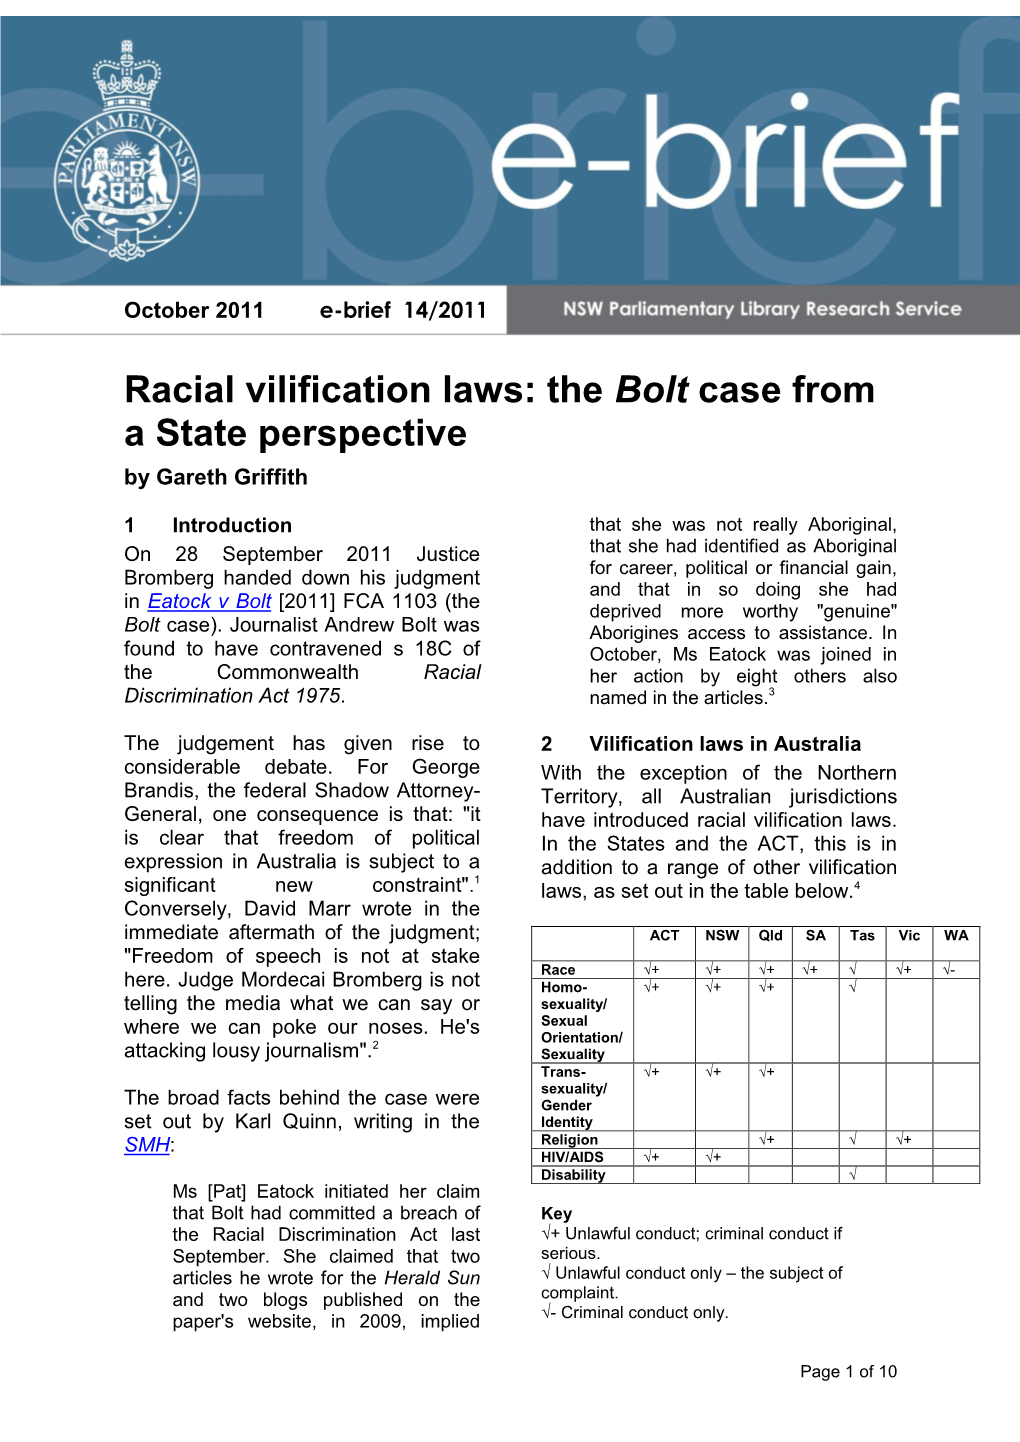 Racial Vilification Laws: the Bolt Case from a State Perspective by Gareth Griffith